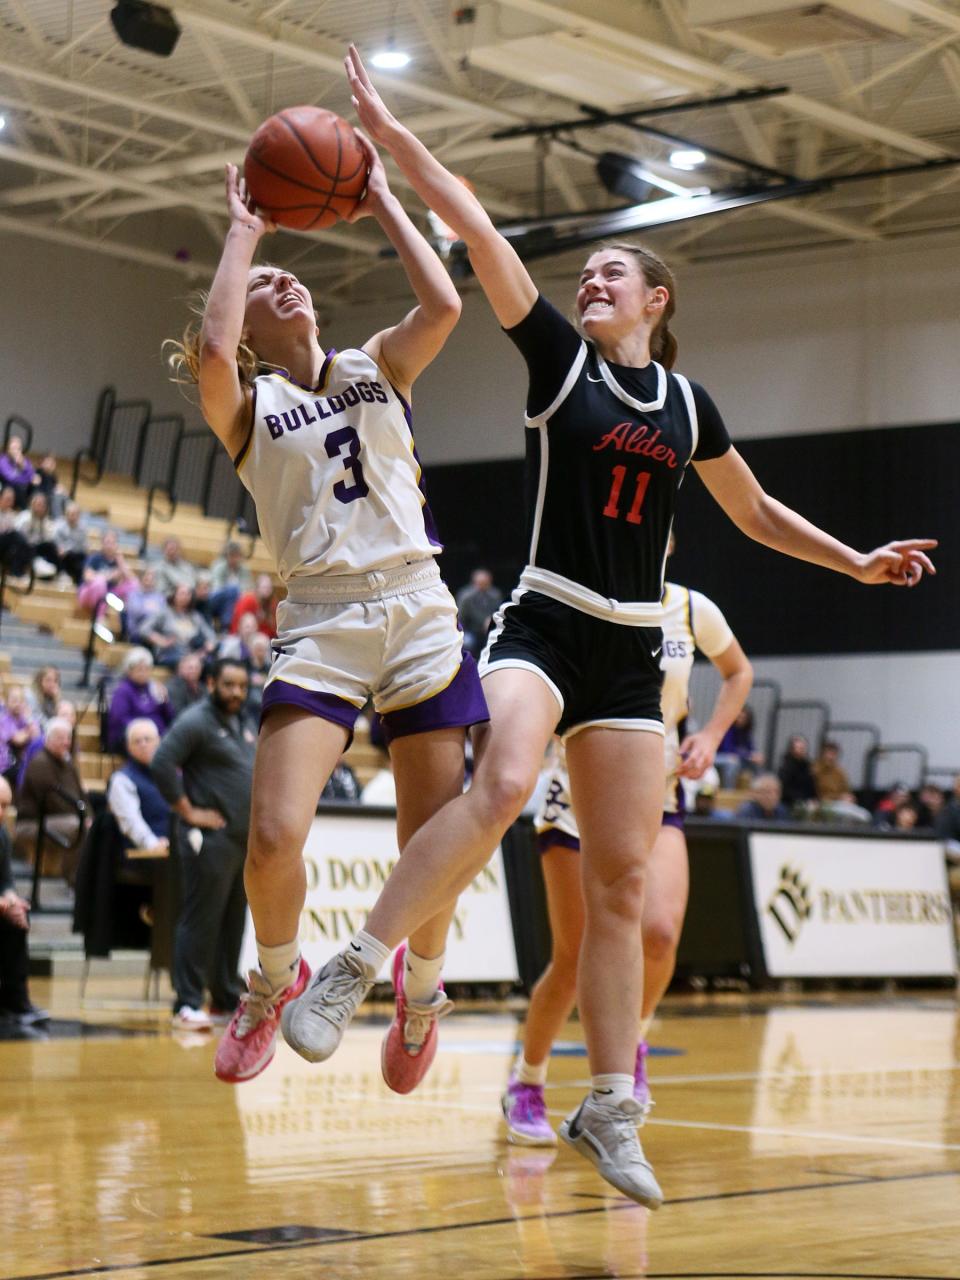 Bloom-Carroll senior guard Emily Bratton ws named first team All-Ohio in Divsion II by the Ohio Prep Sportswriters Association.